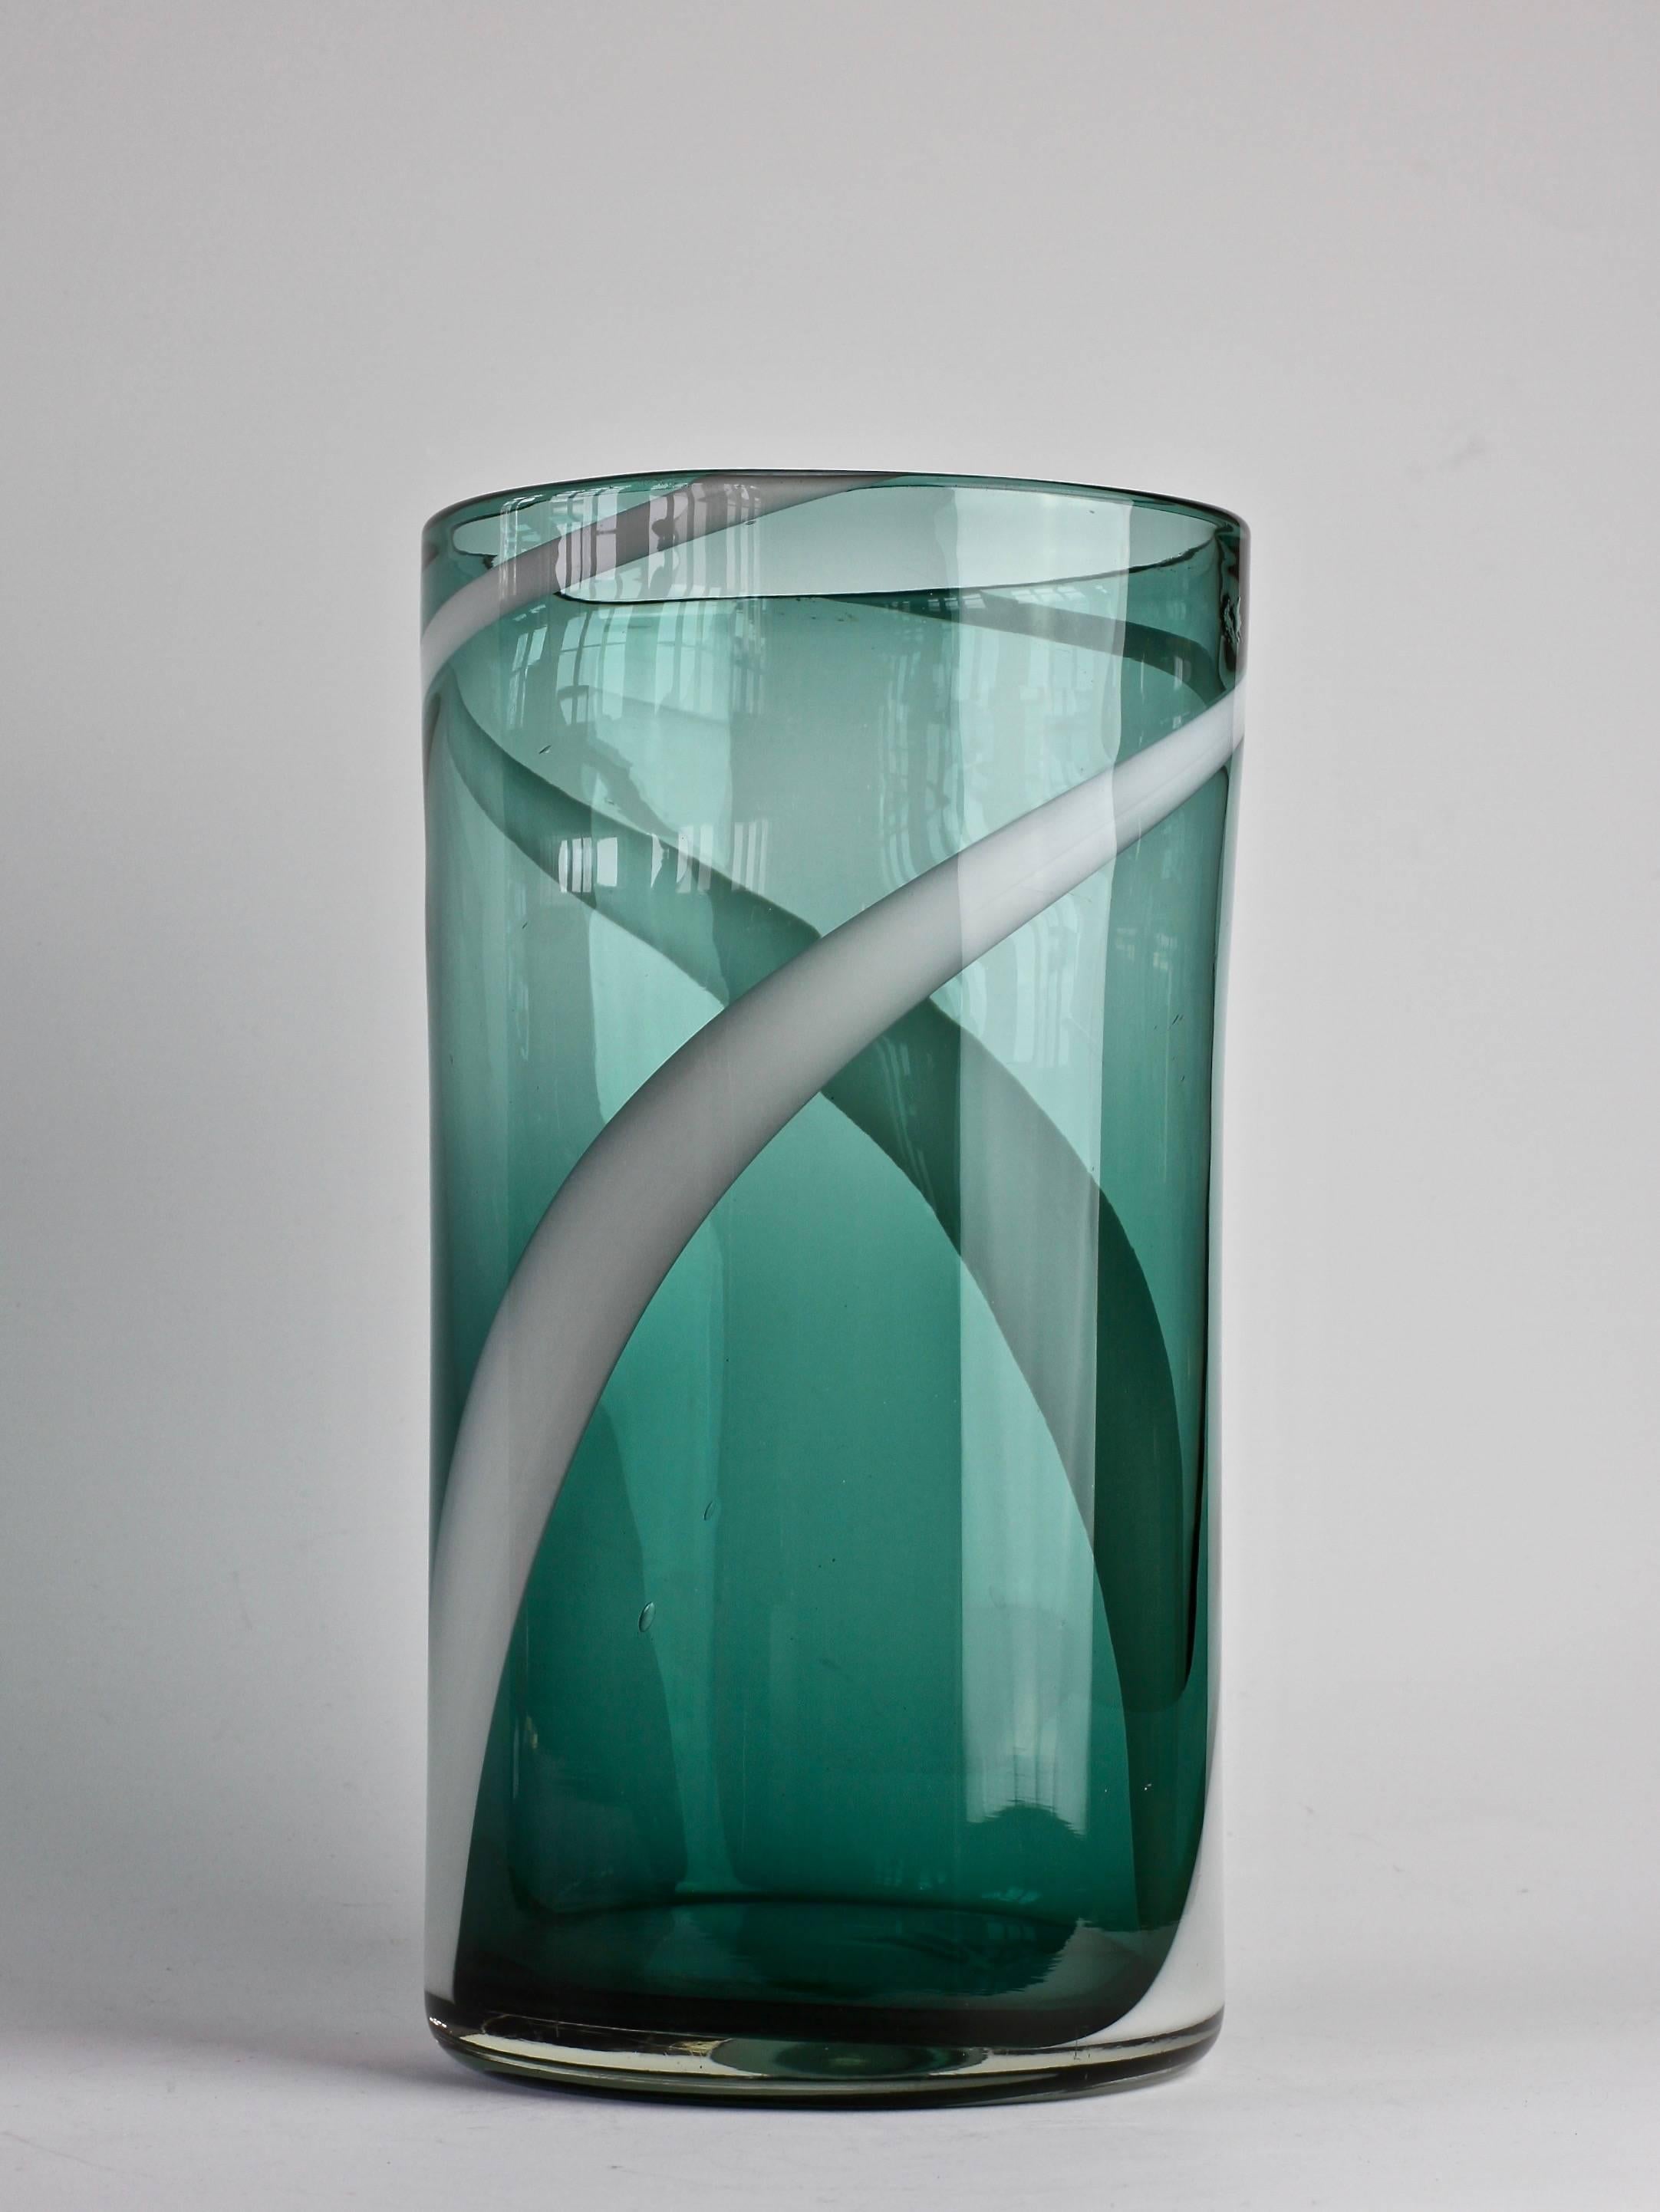 Fulvio Bianconi style Murano glass vase - featuring green glass with white glass inclusions in a spiral form - this piece is very much in the style of Fulvio Bianconi's work for Venini, Italy, circa 1950s.

As yet, an unknown creator.